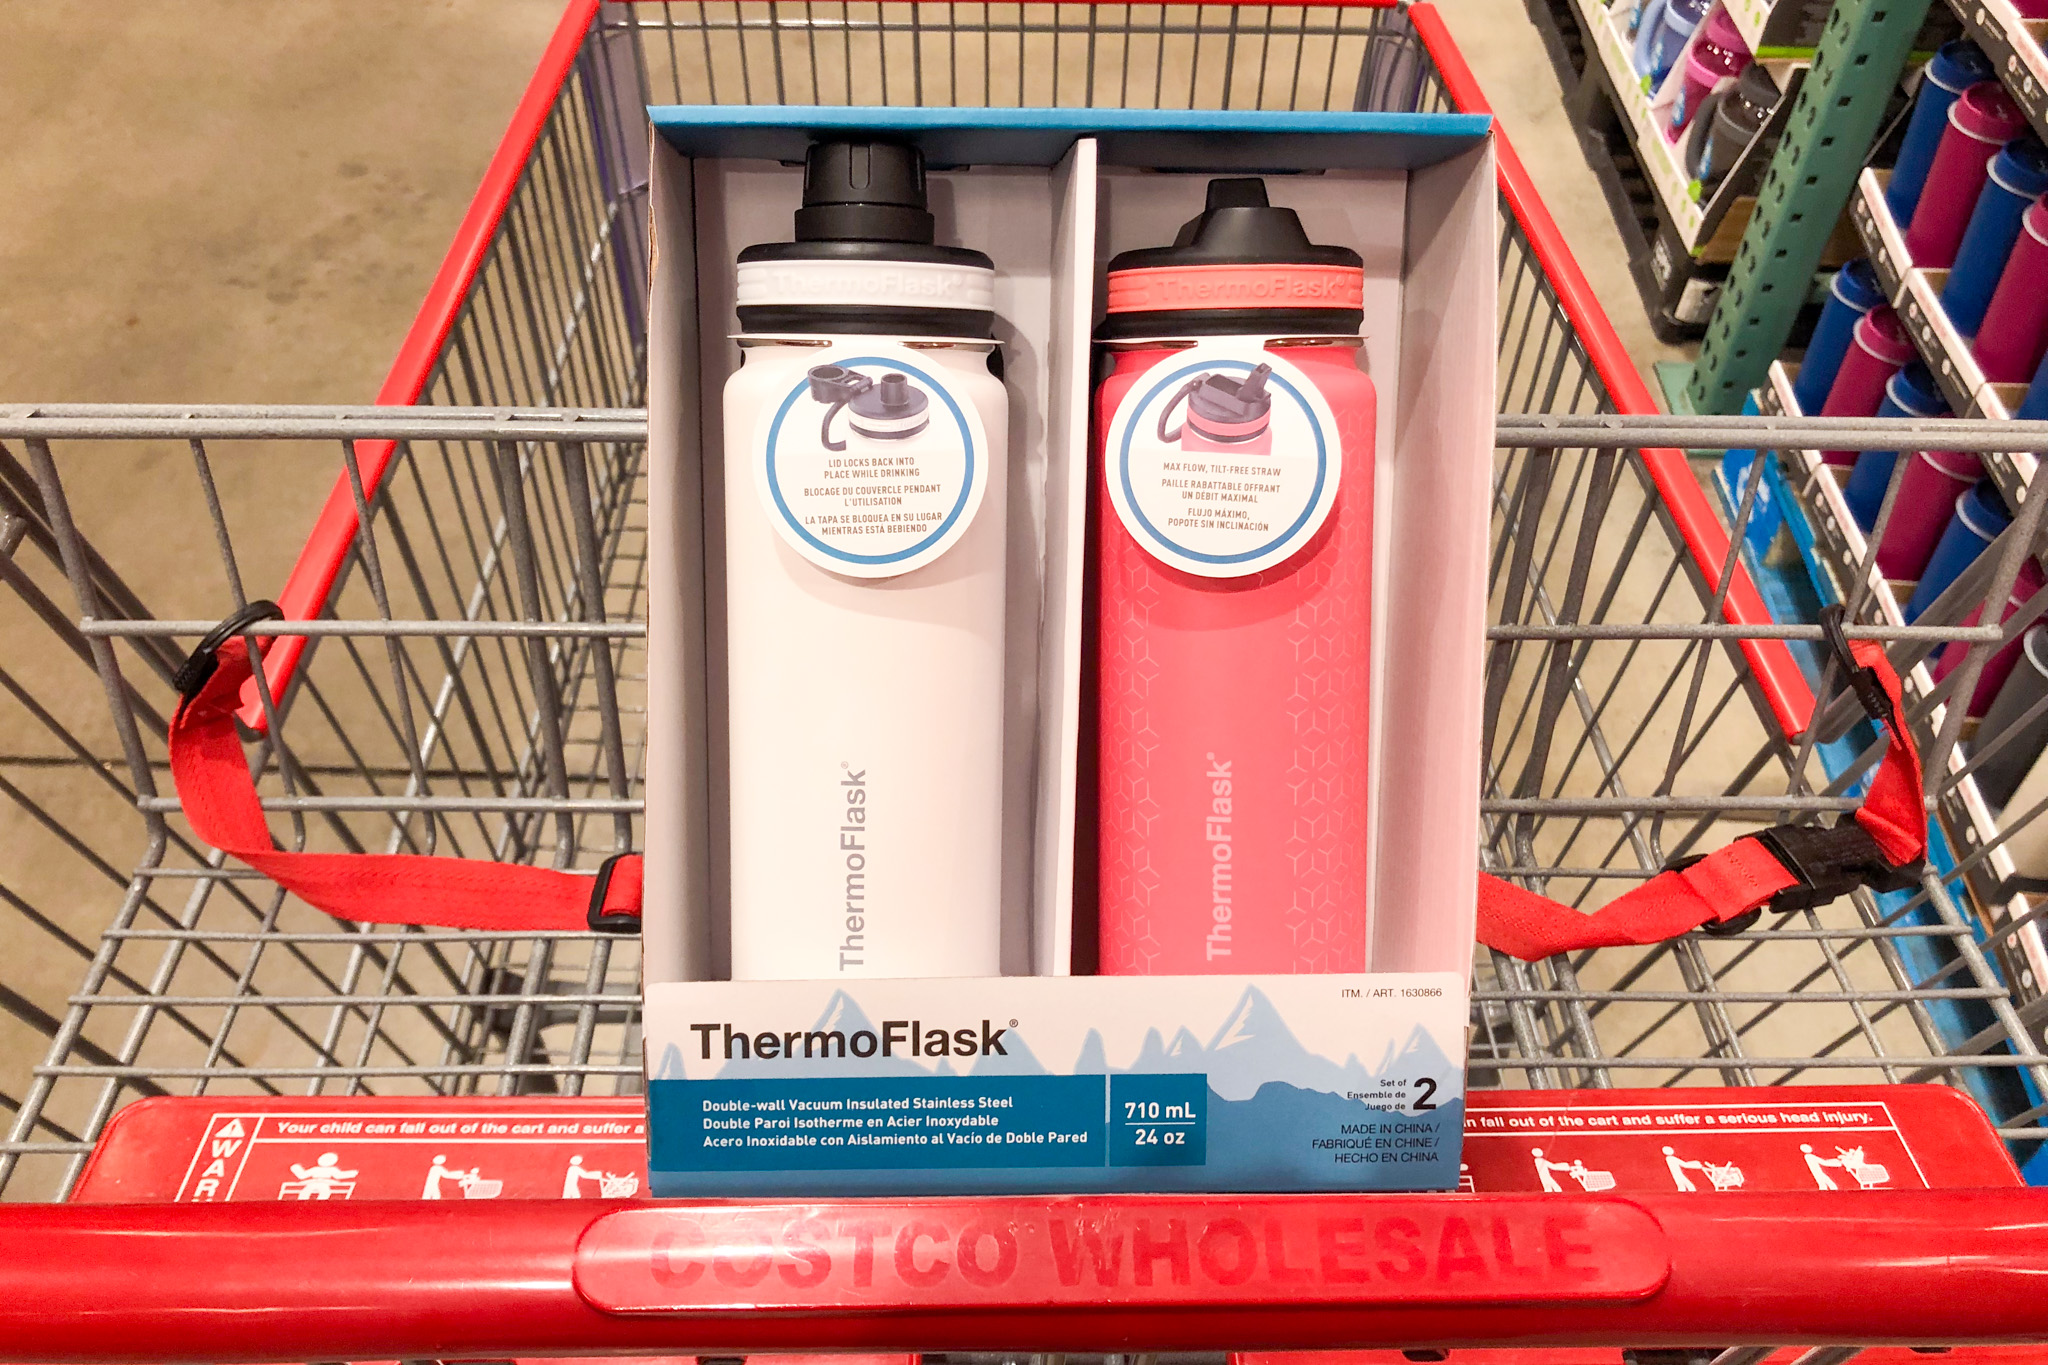 Costco Buys - Costco has these AMAZING Thermoflask 2-pack